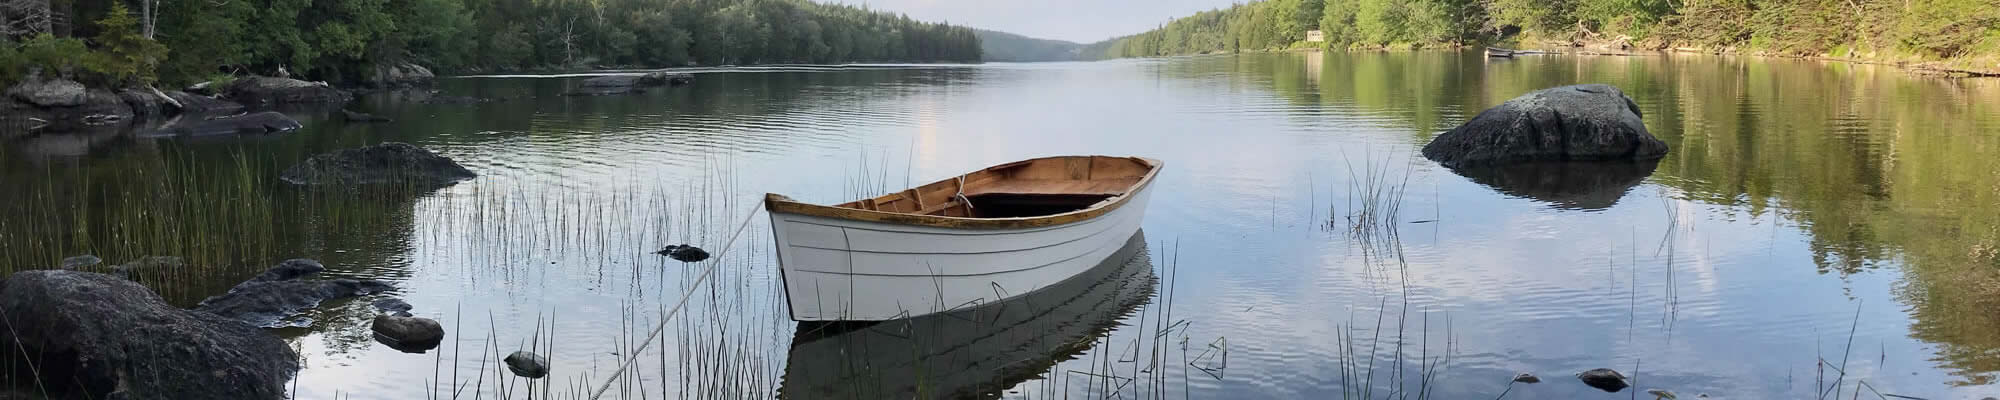 Image of boat tied to dock in a lake.